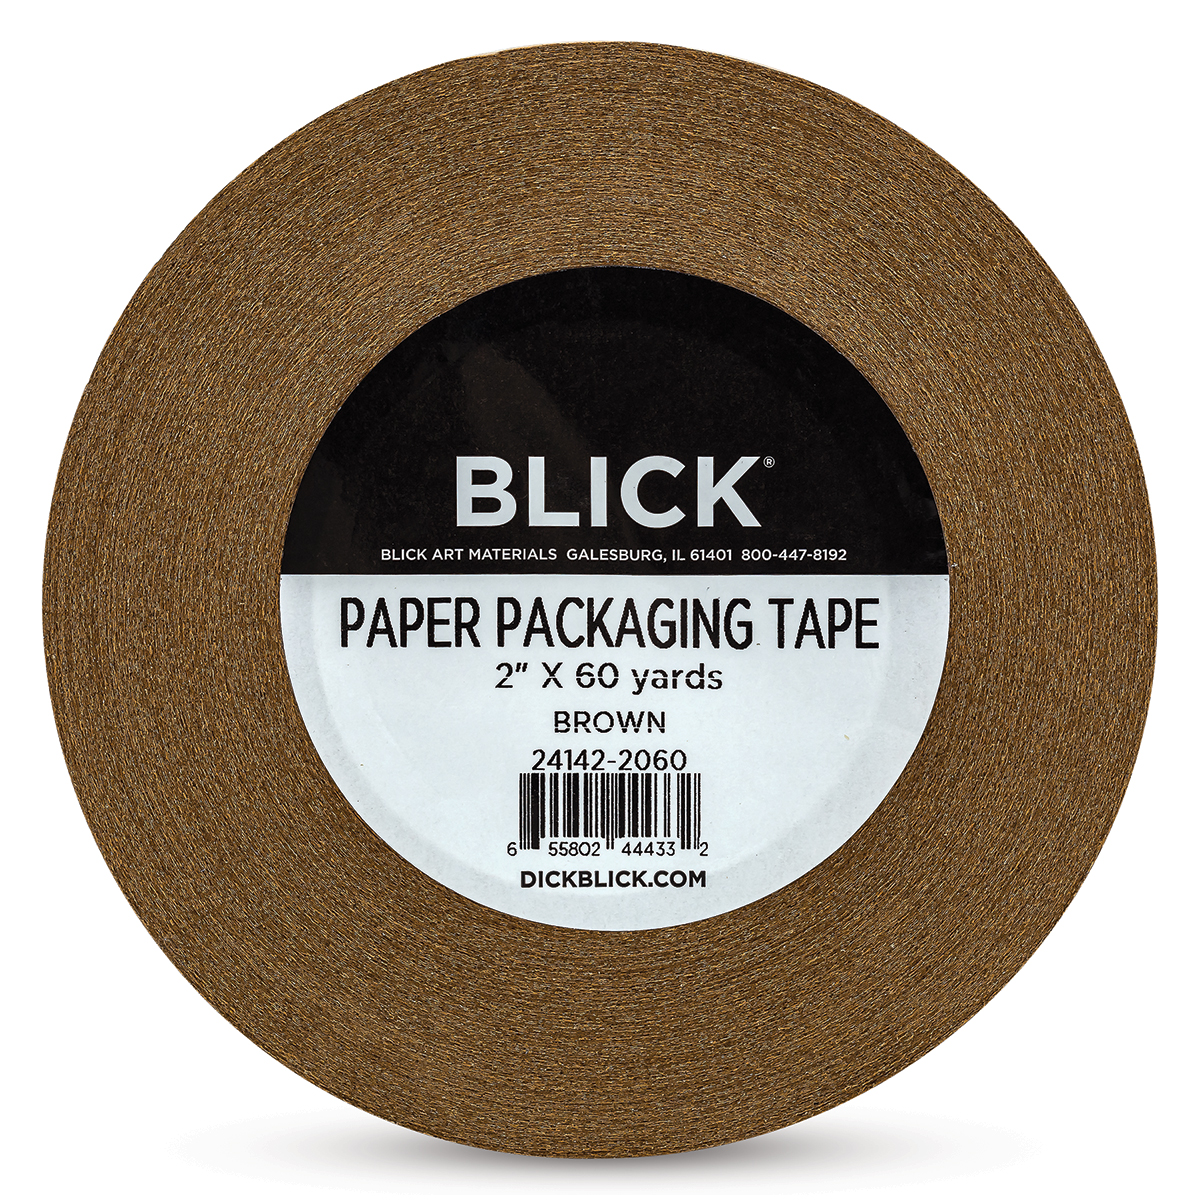 Masking Tape Piece. Brown Glue Sticky Pa Graphic by yummybuum